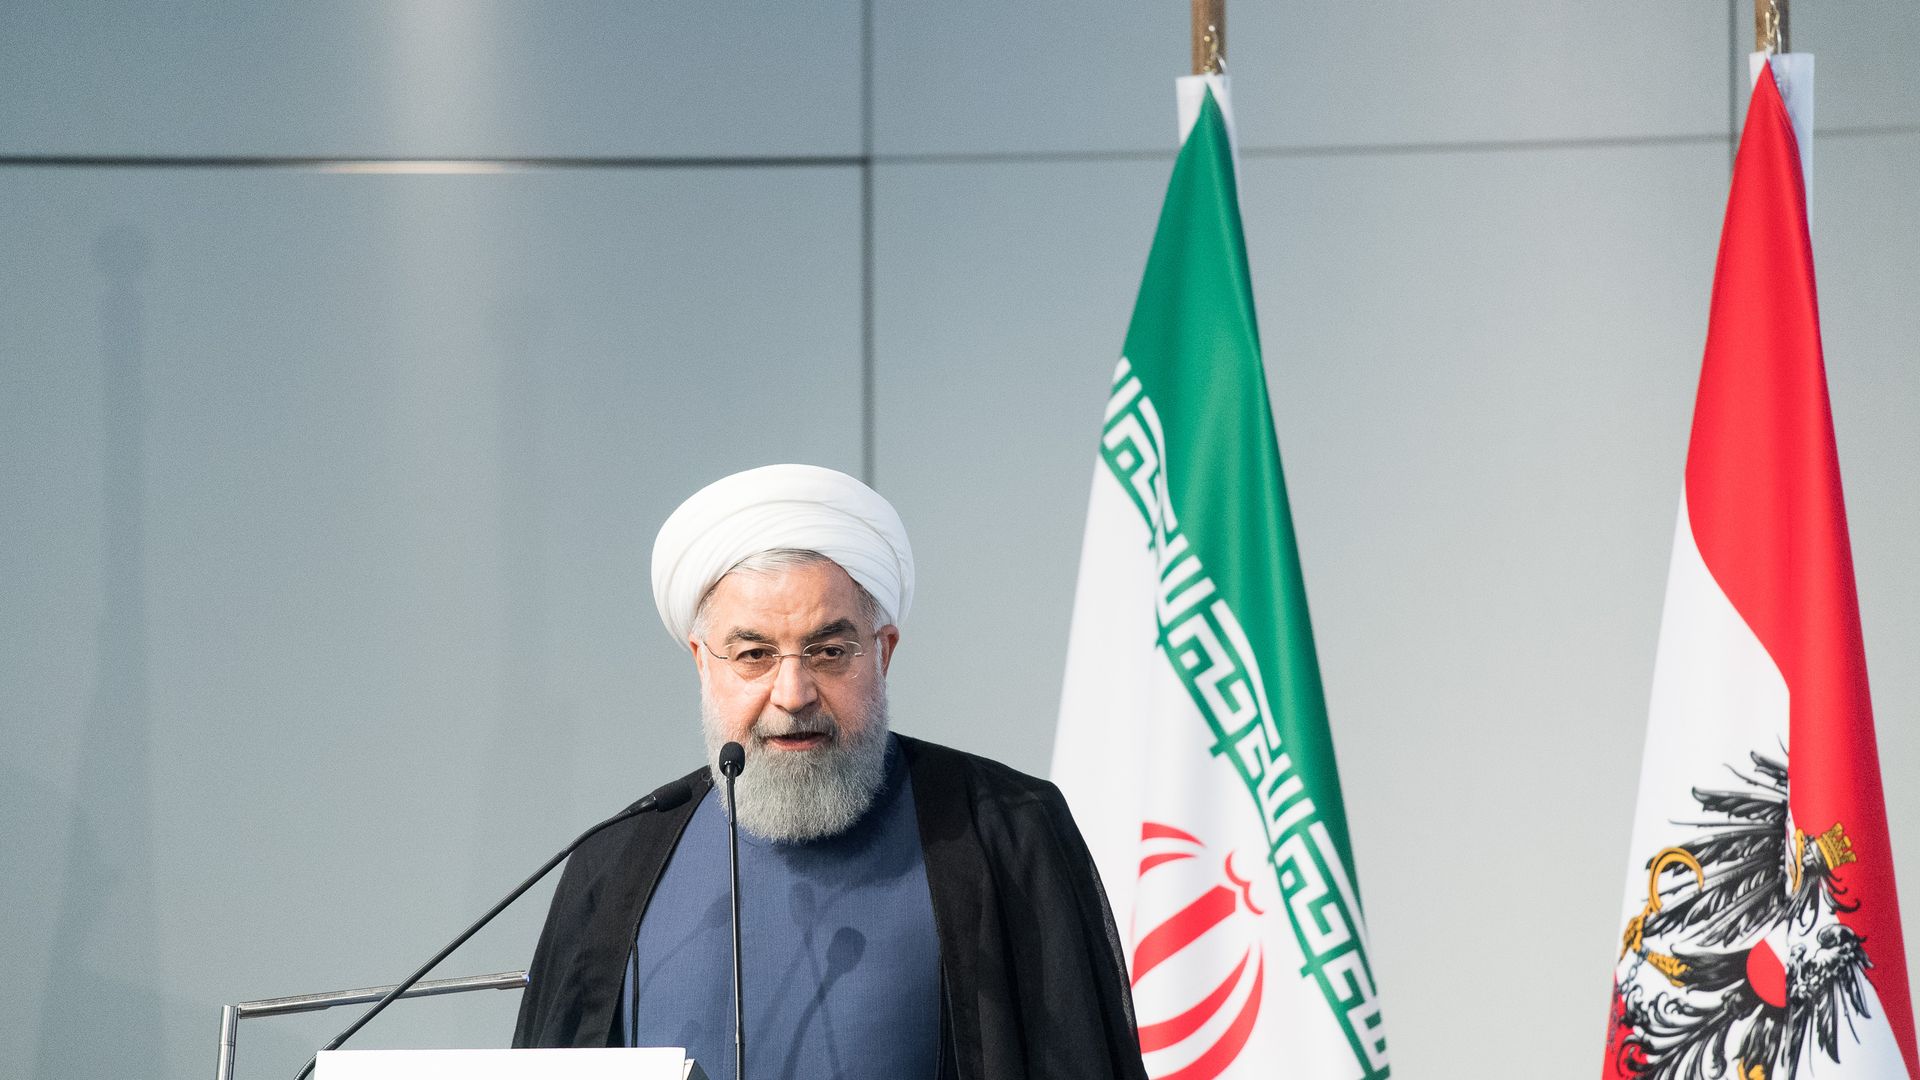 Iranian President Hassan Rouhani speaking in front of two flags.